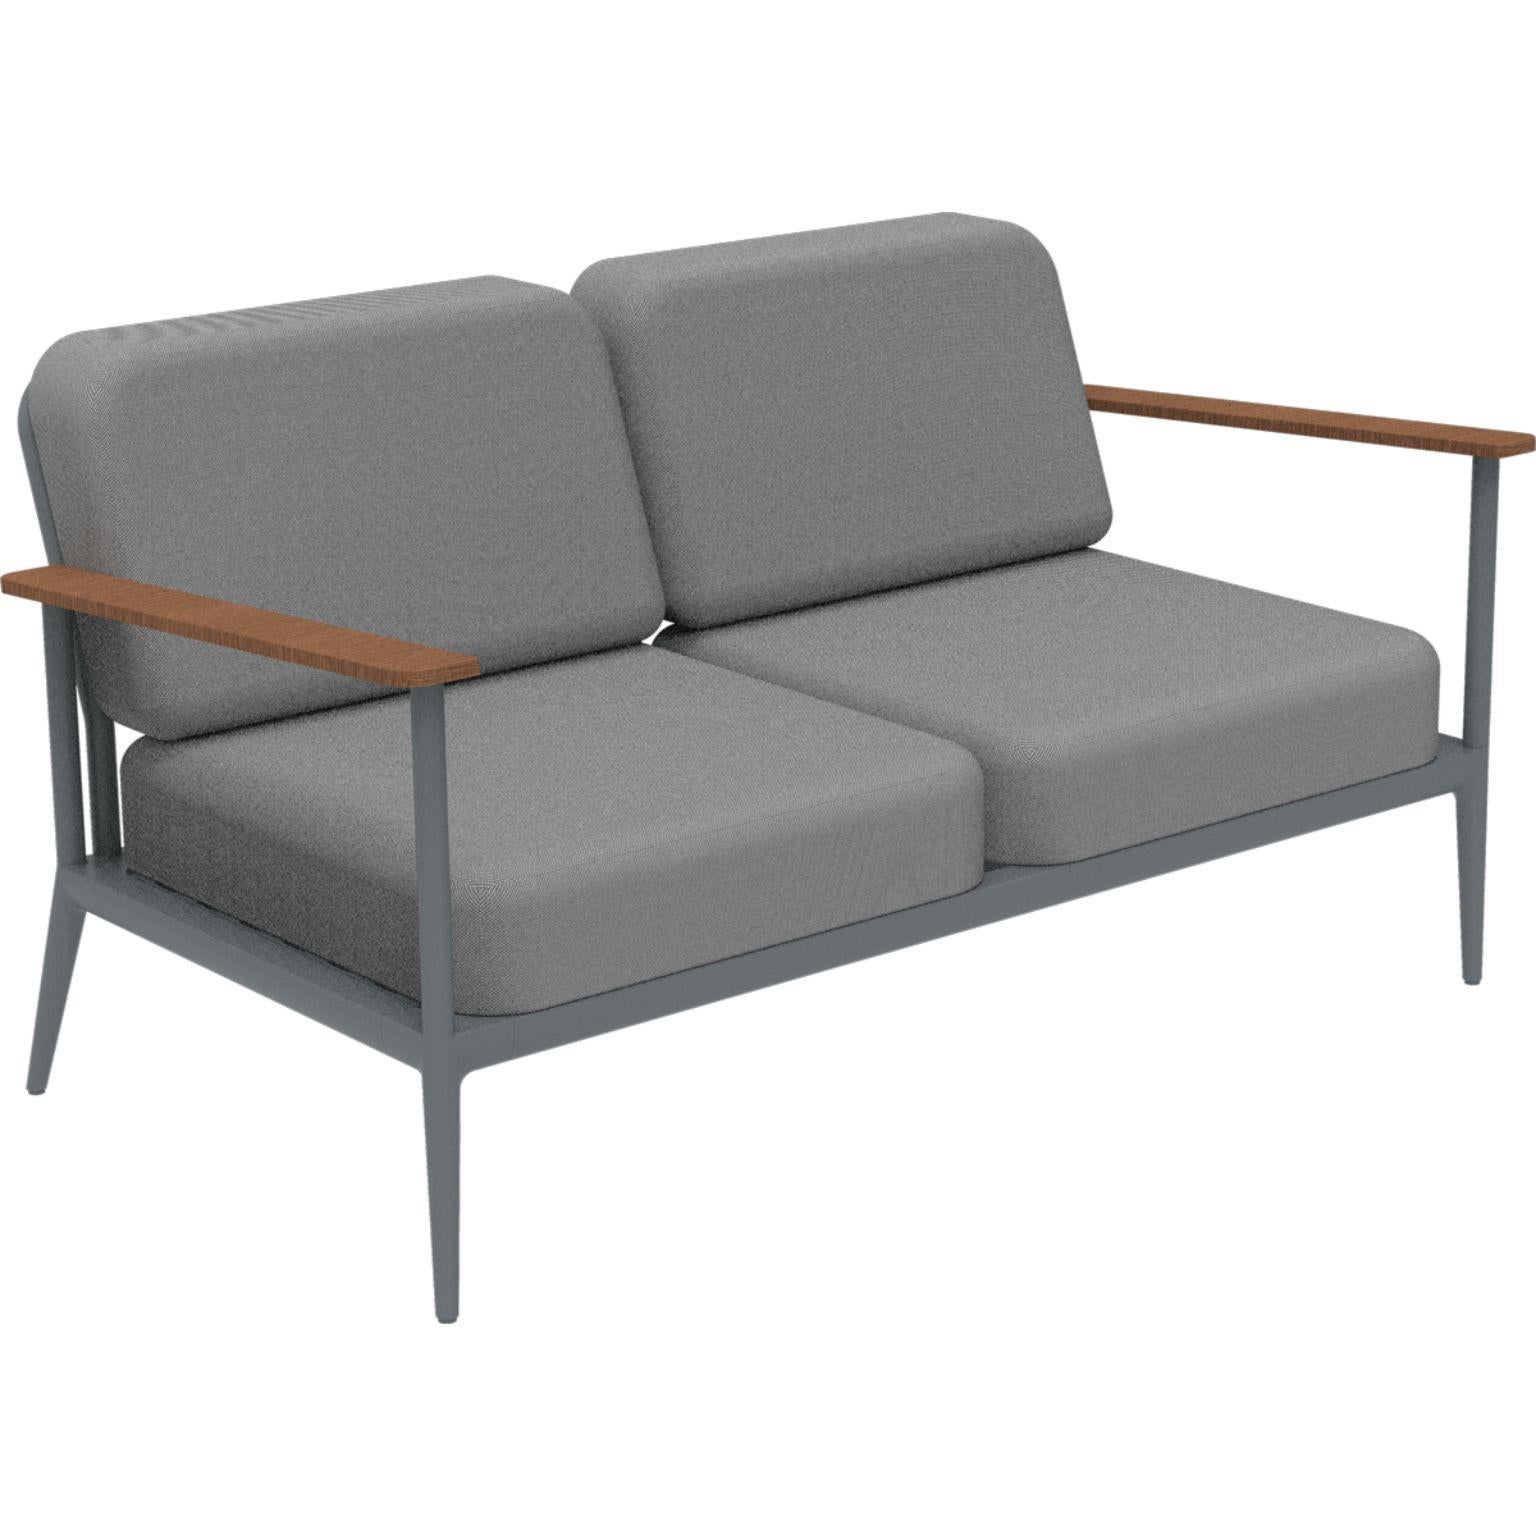 Nature grey sofa by MOWEE
Dimensions: D85 x W151 x H81 cm (seat height 42 cm).
Material: Aluminum, upholstery and Iroko Wood.
Weight: 32 kg.
Also available in different colors and finishes.

An unmistakable collection for its beauty and